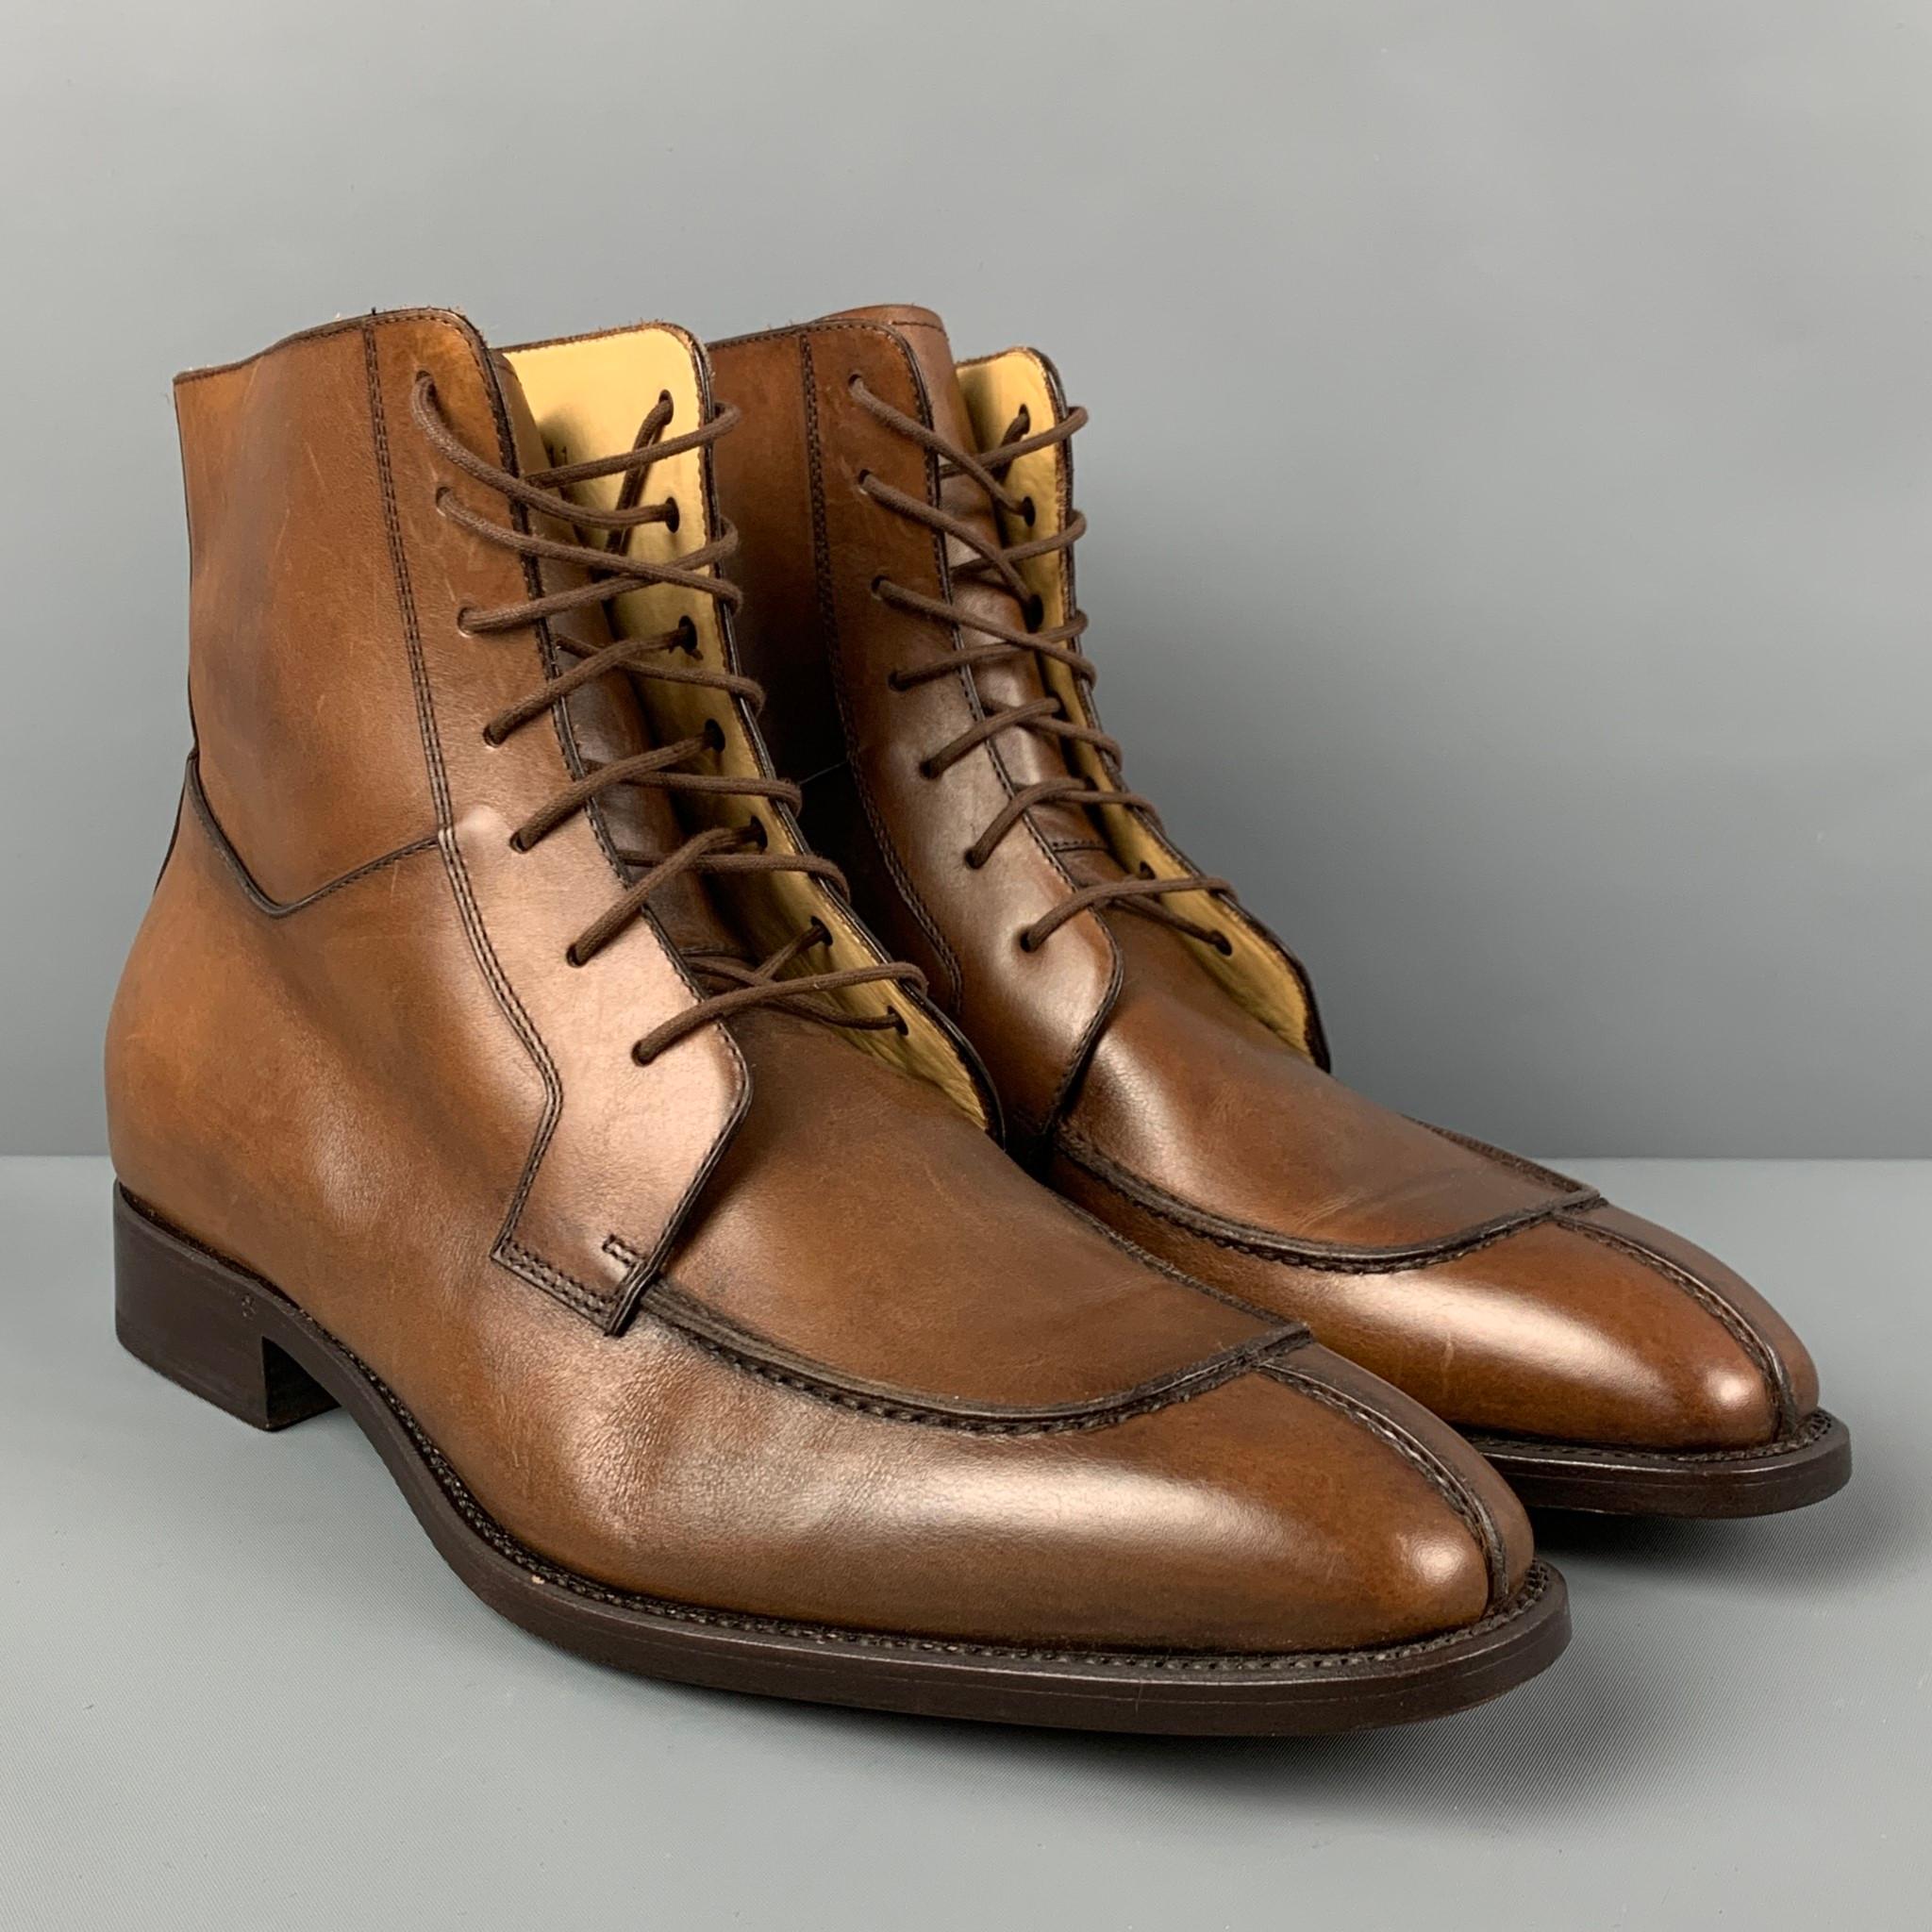 PAUL STUART boots comes in a brown antique leather featuring a split toe and a lace up closure. Made in Italy. 

Very Good Pre-Owned Condition.
Marked: 7229 11

Measurements:

Length: 12.25 in.
Width: 4.25 in.
Height: 6 in. 